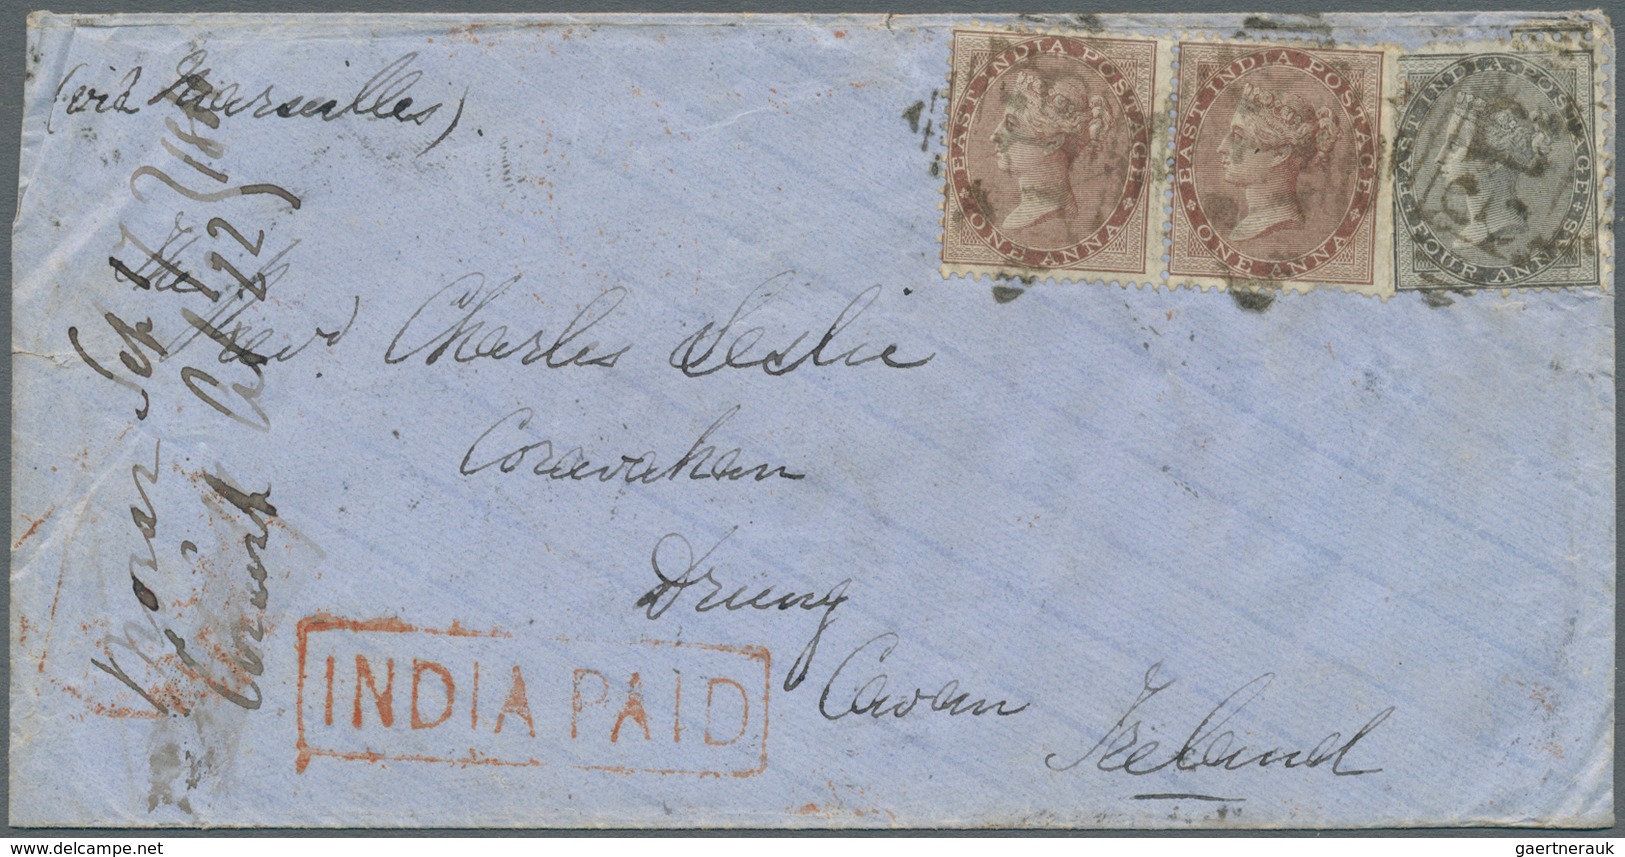 Indien: 1859/1960: Very fine lot of 57 envelopes, picture postcards and postal stationeries includin